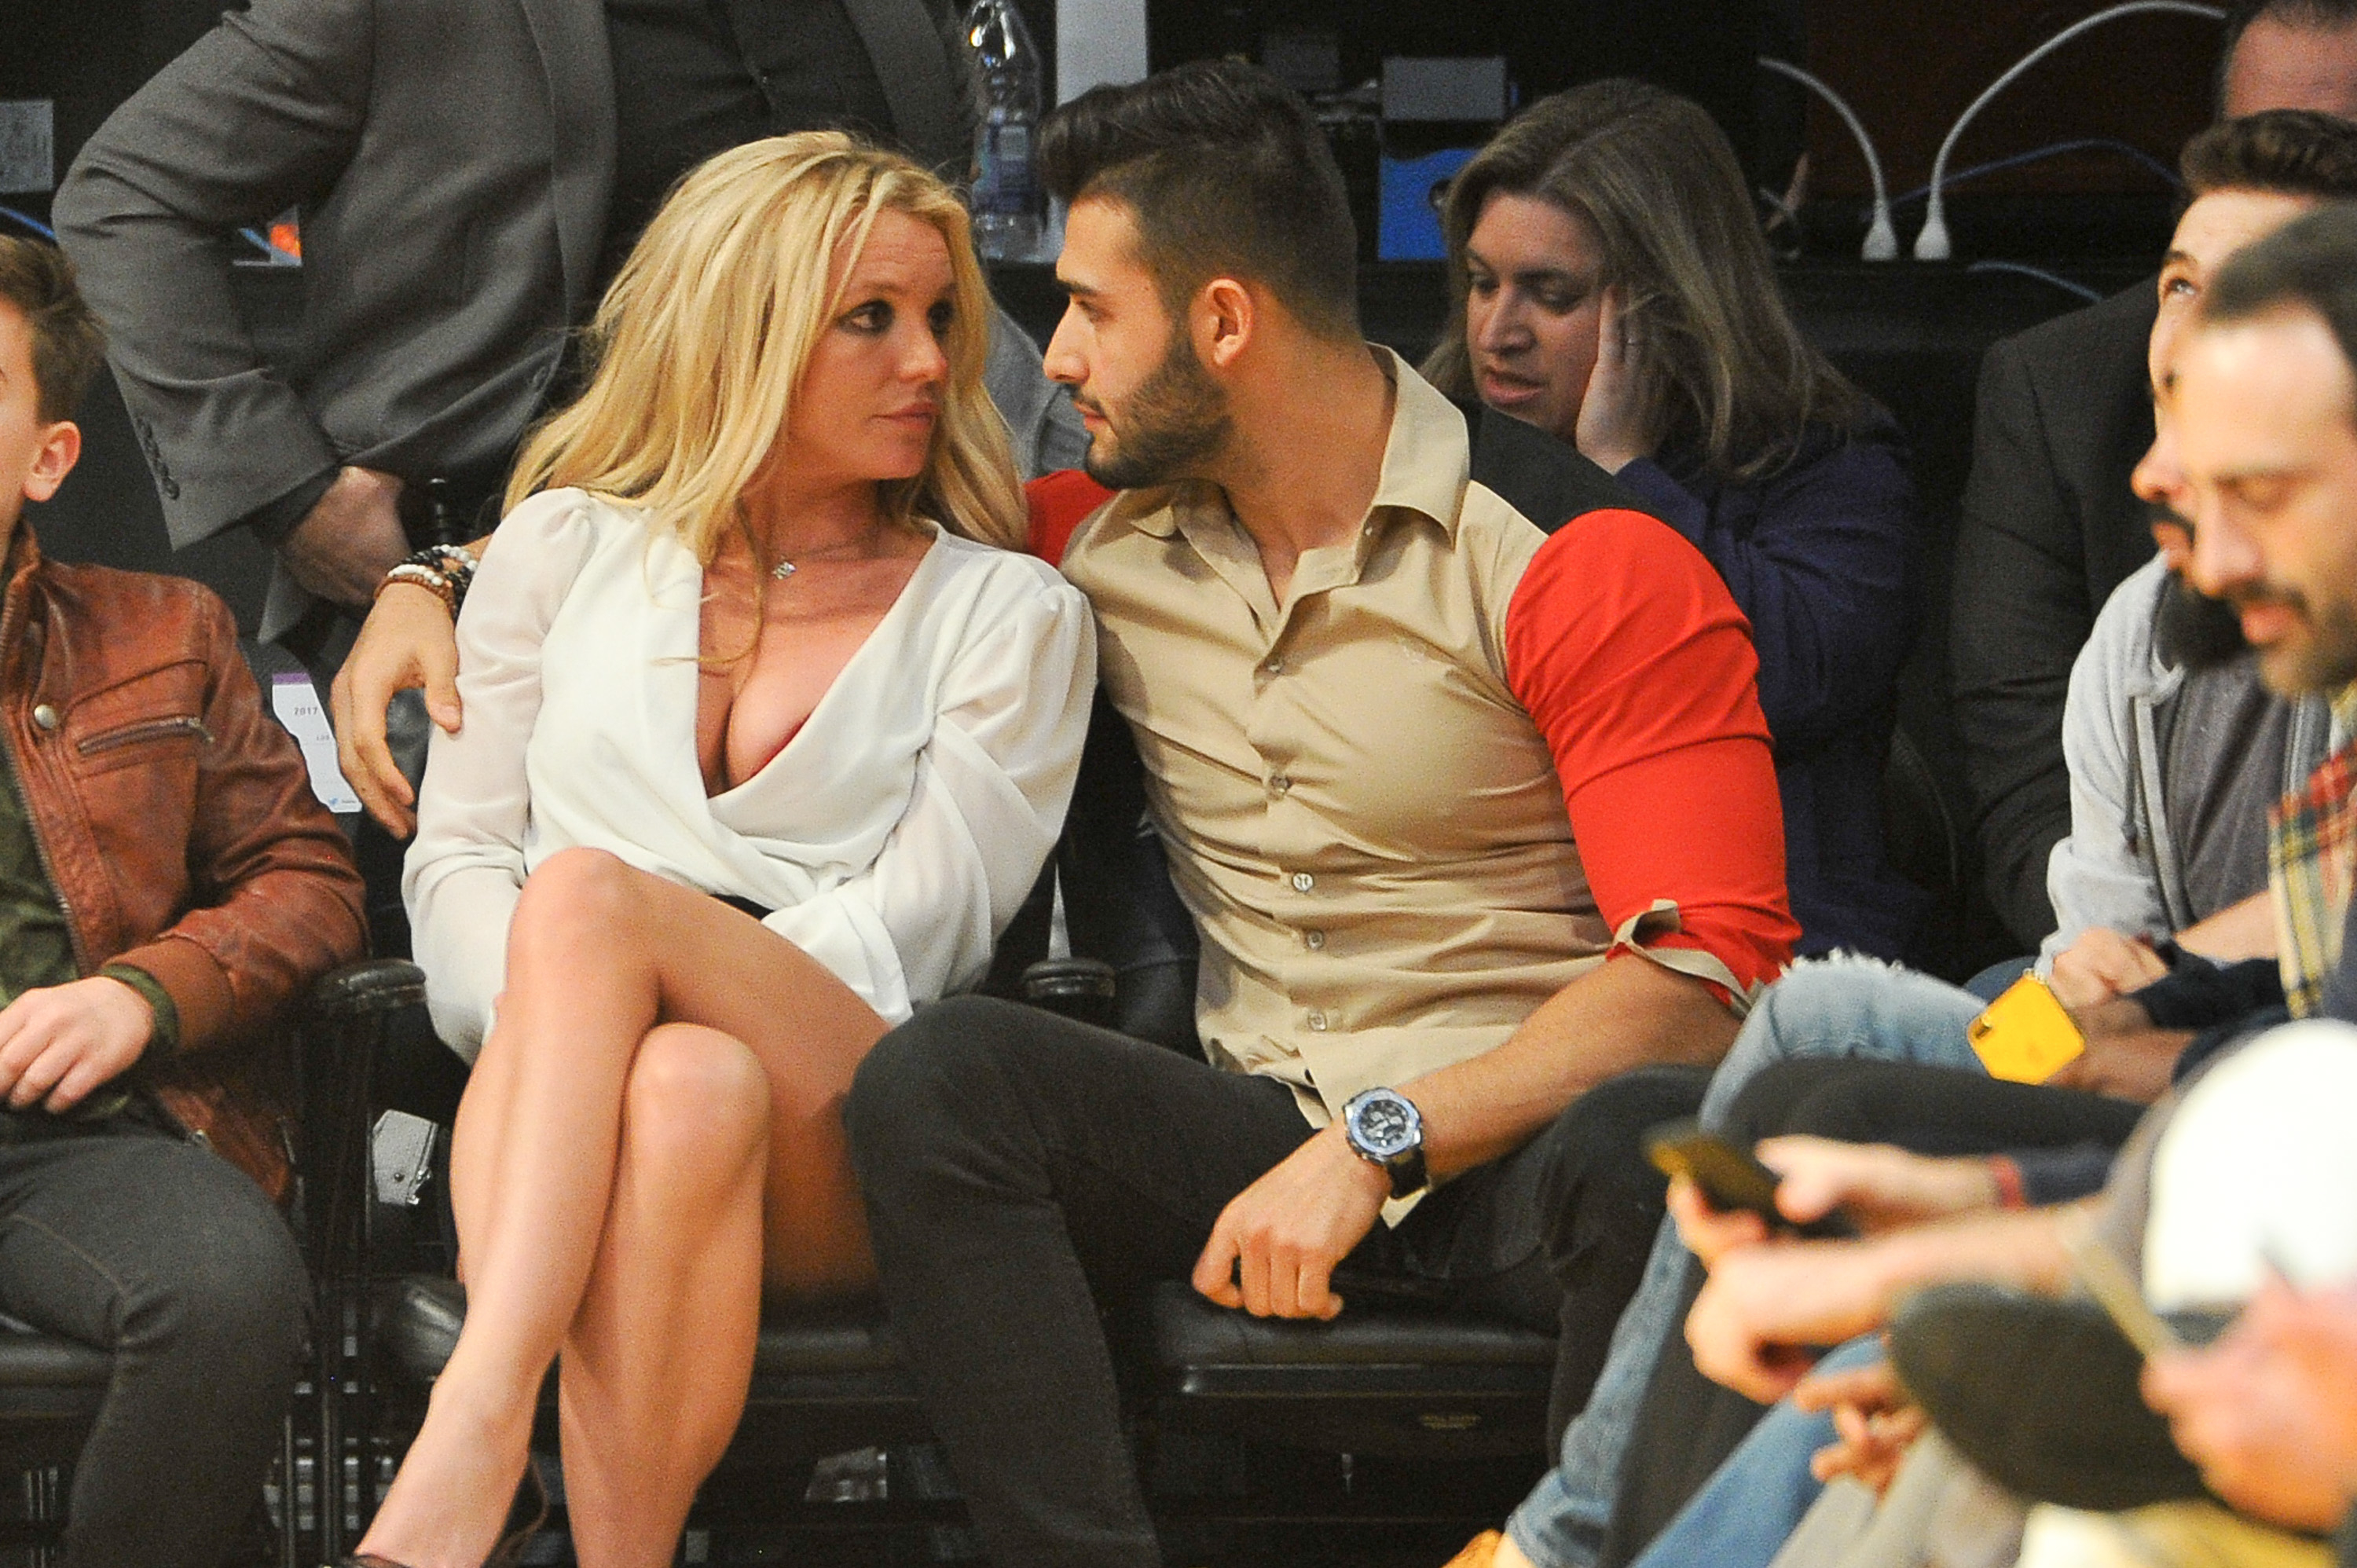 Close-up of Sam and Britney sitting together and looking at each other